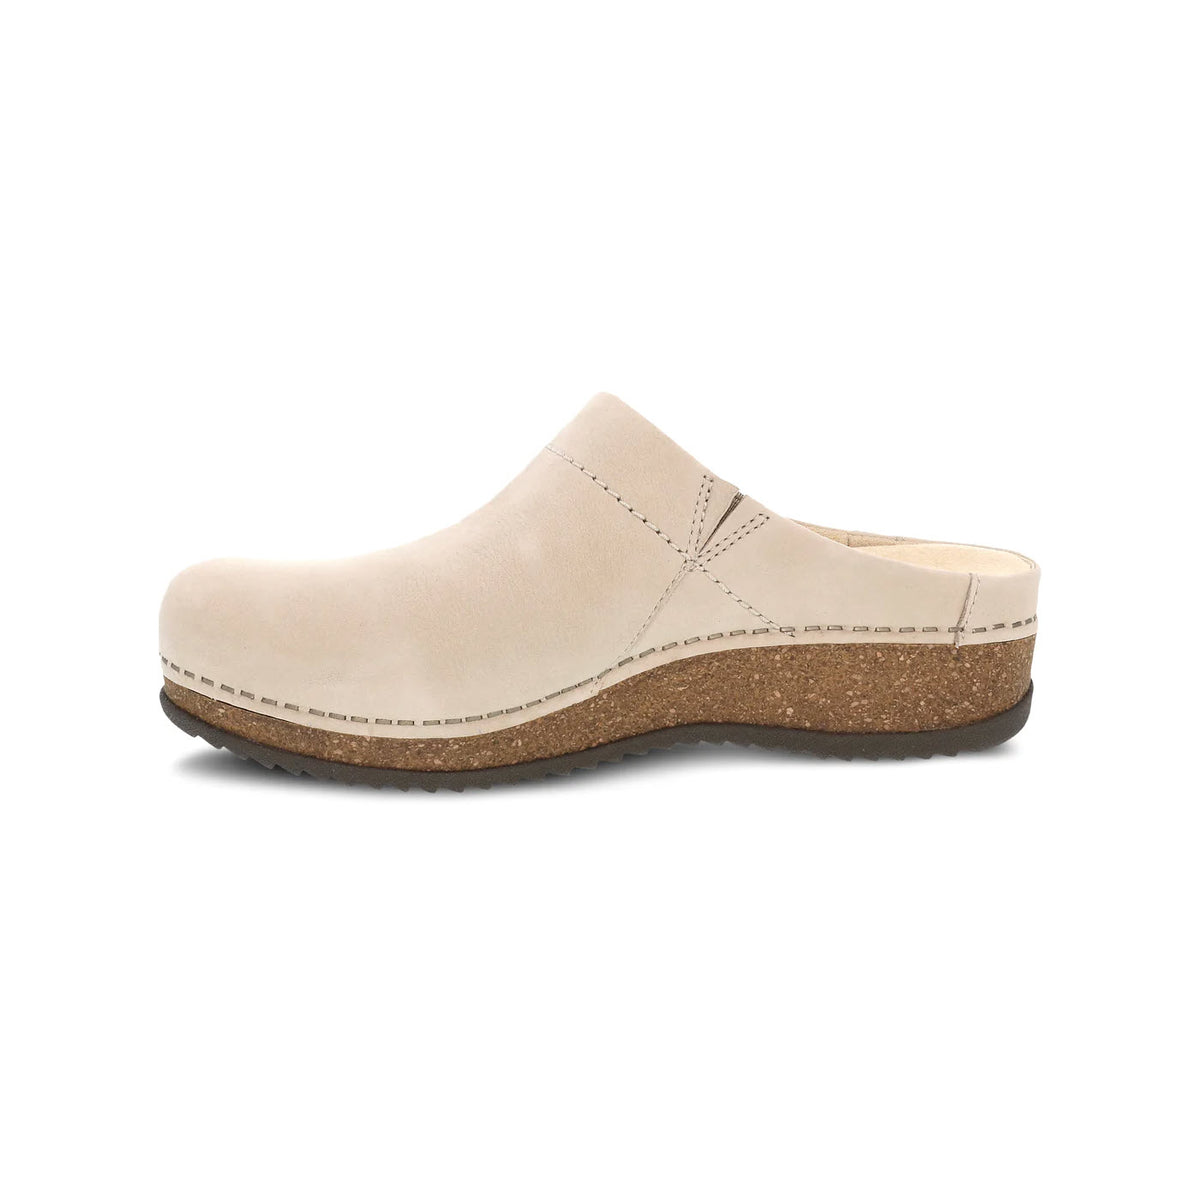 A single beige Dansko Mariella Linen open back clog with a cork sole, isolated on a white background.